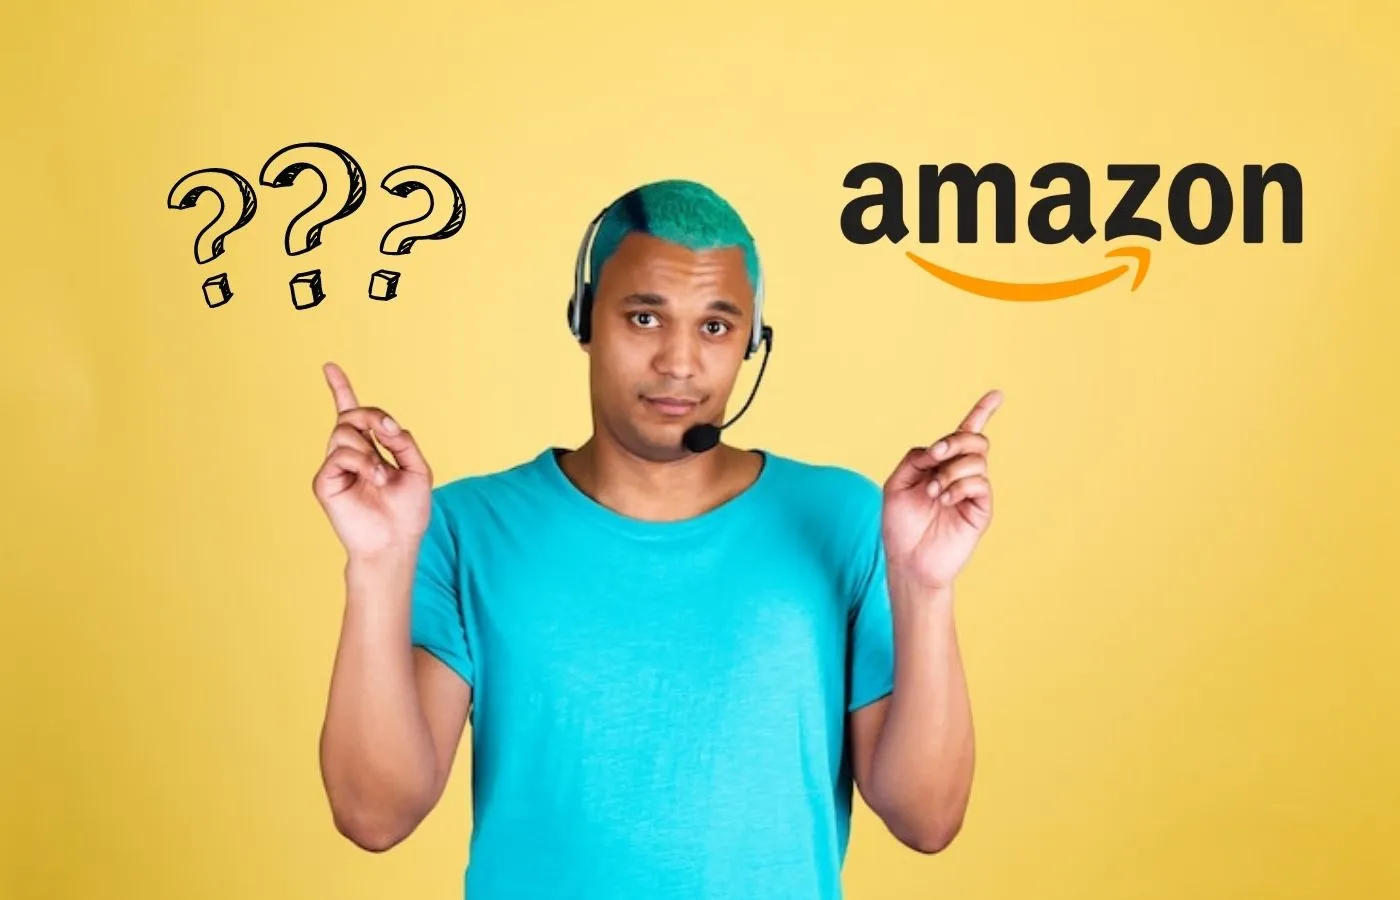 Where to Find Amazon Work from Home Jobs